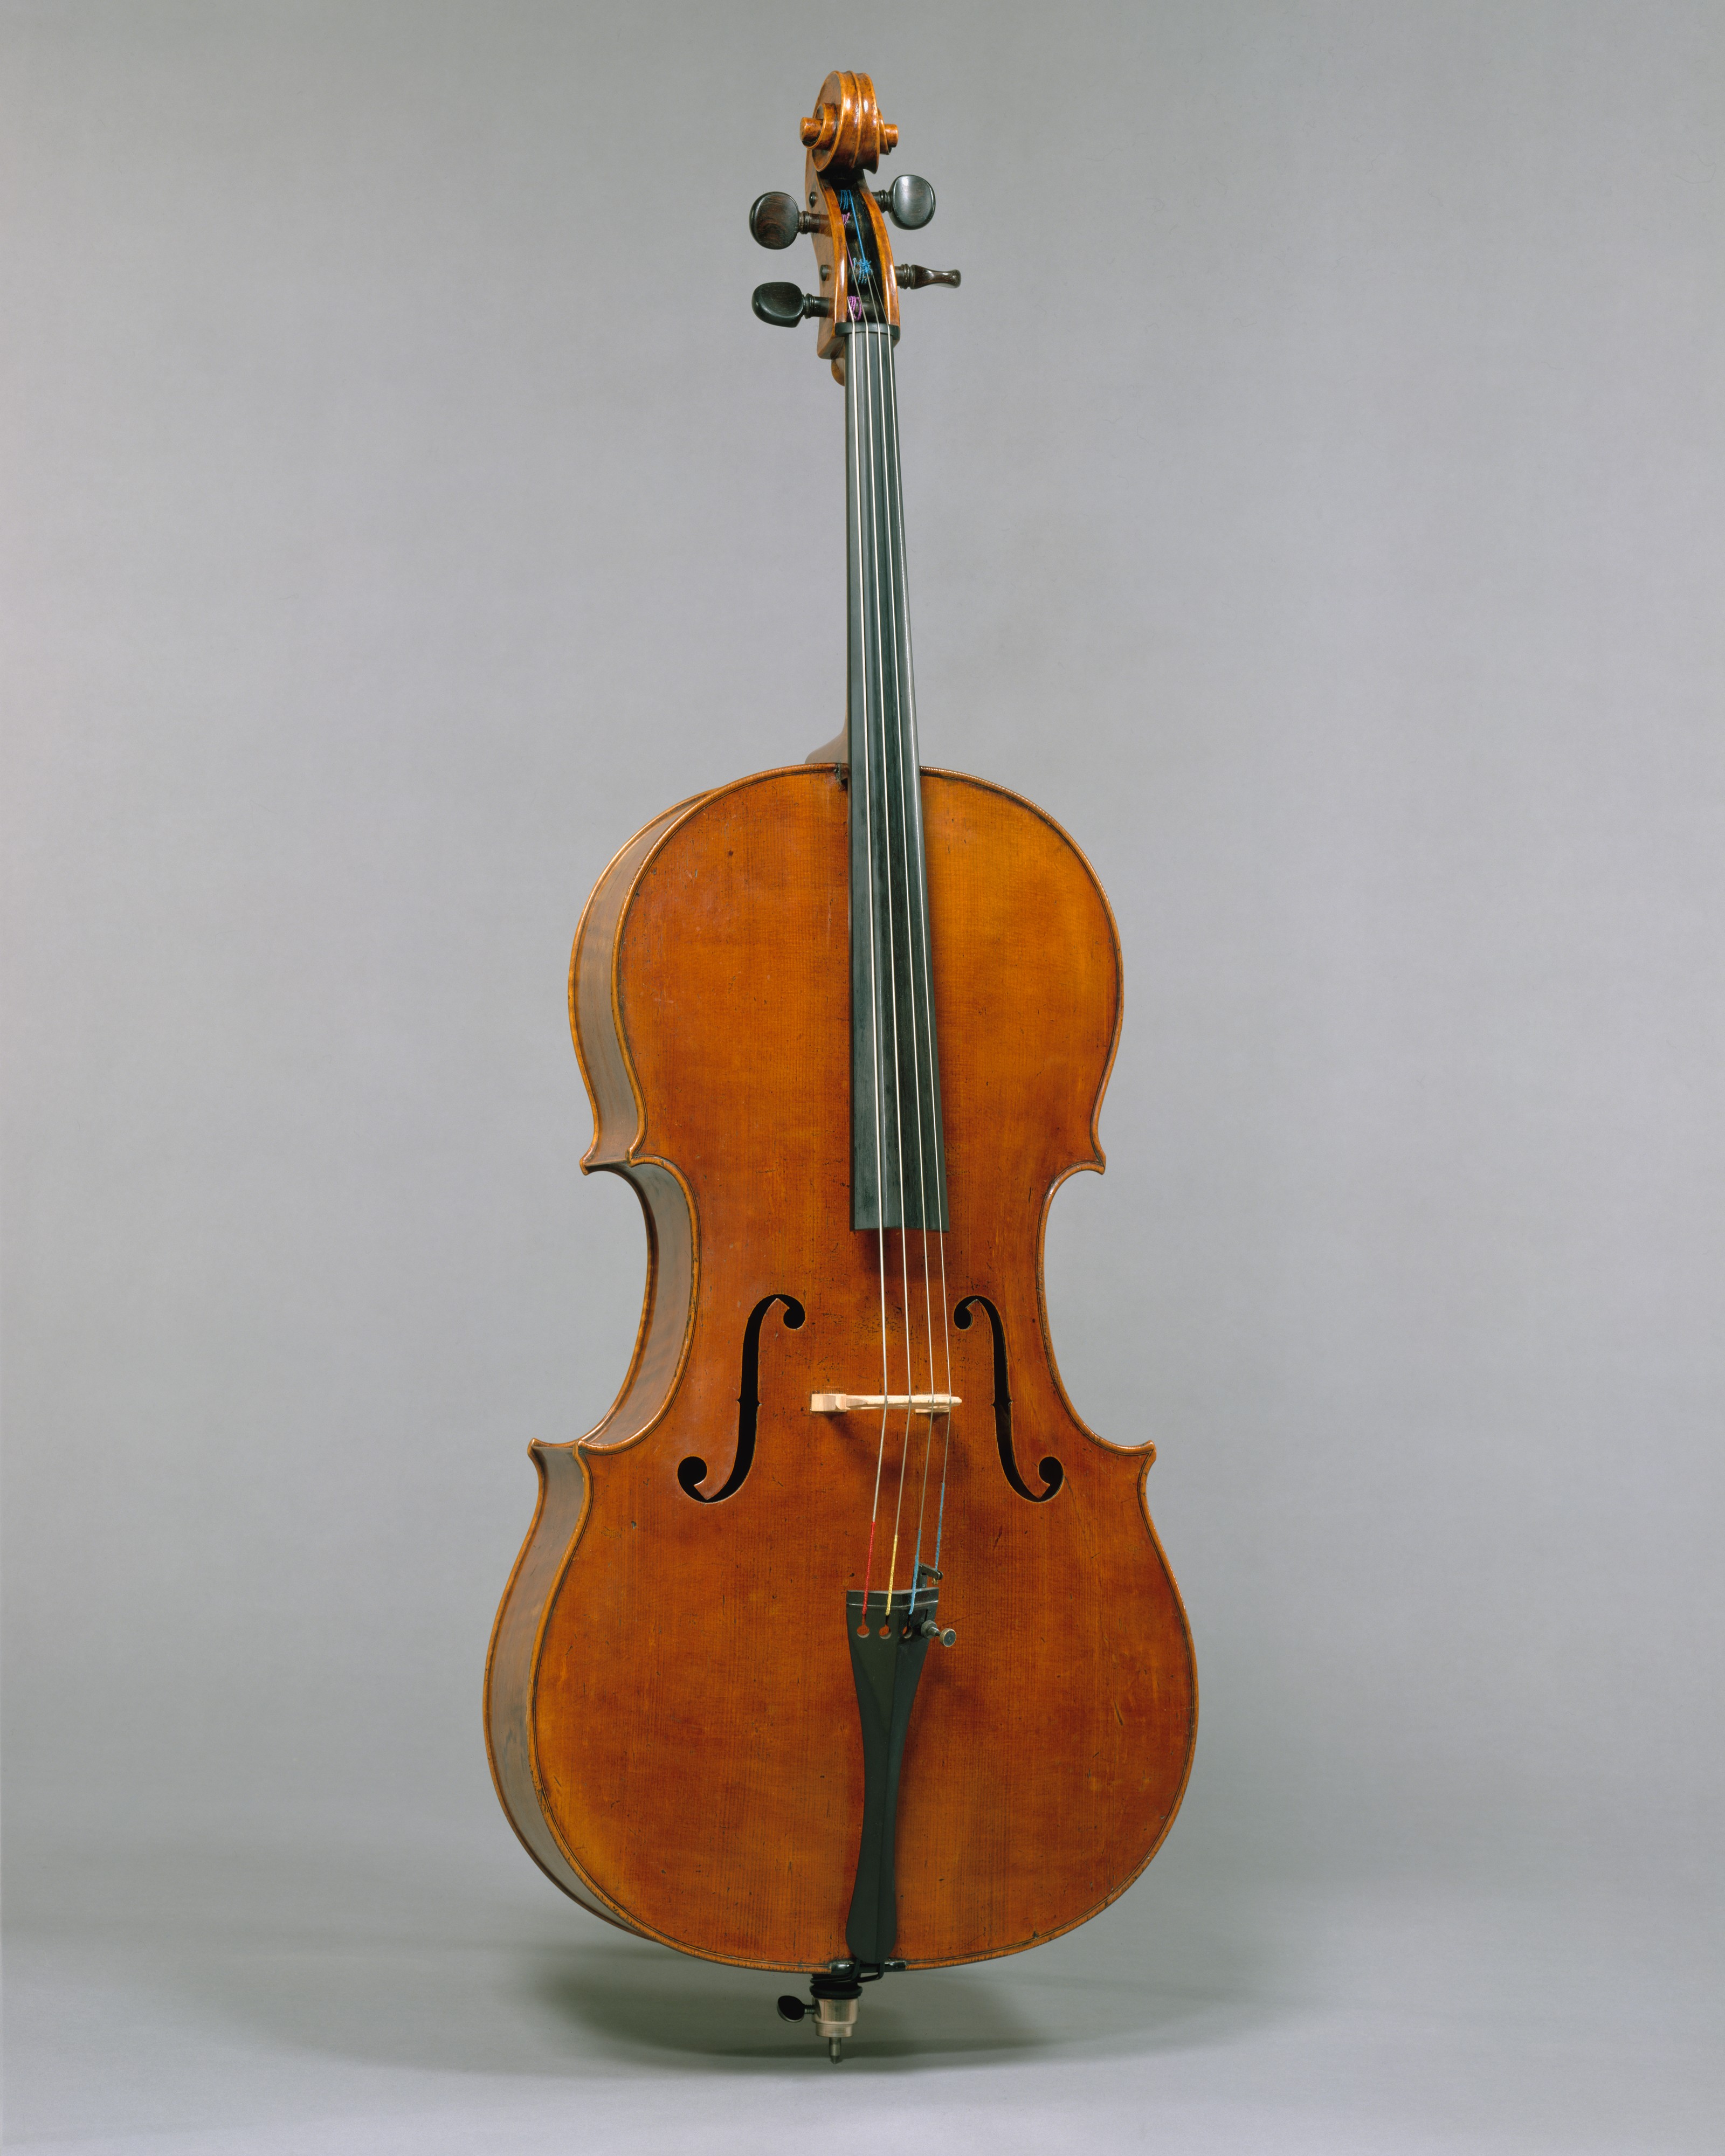 Attributed to François-Louis Pique, Violoncello, French